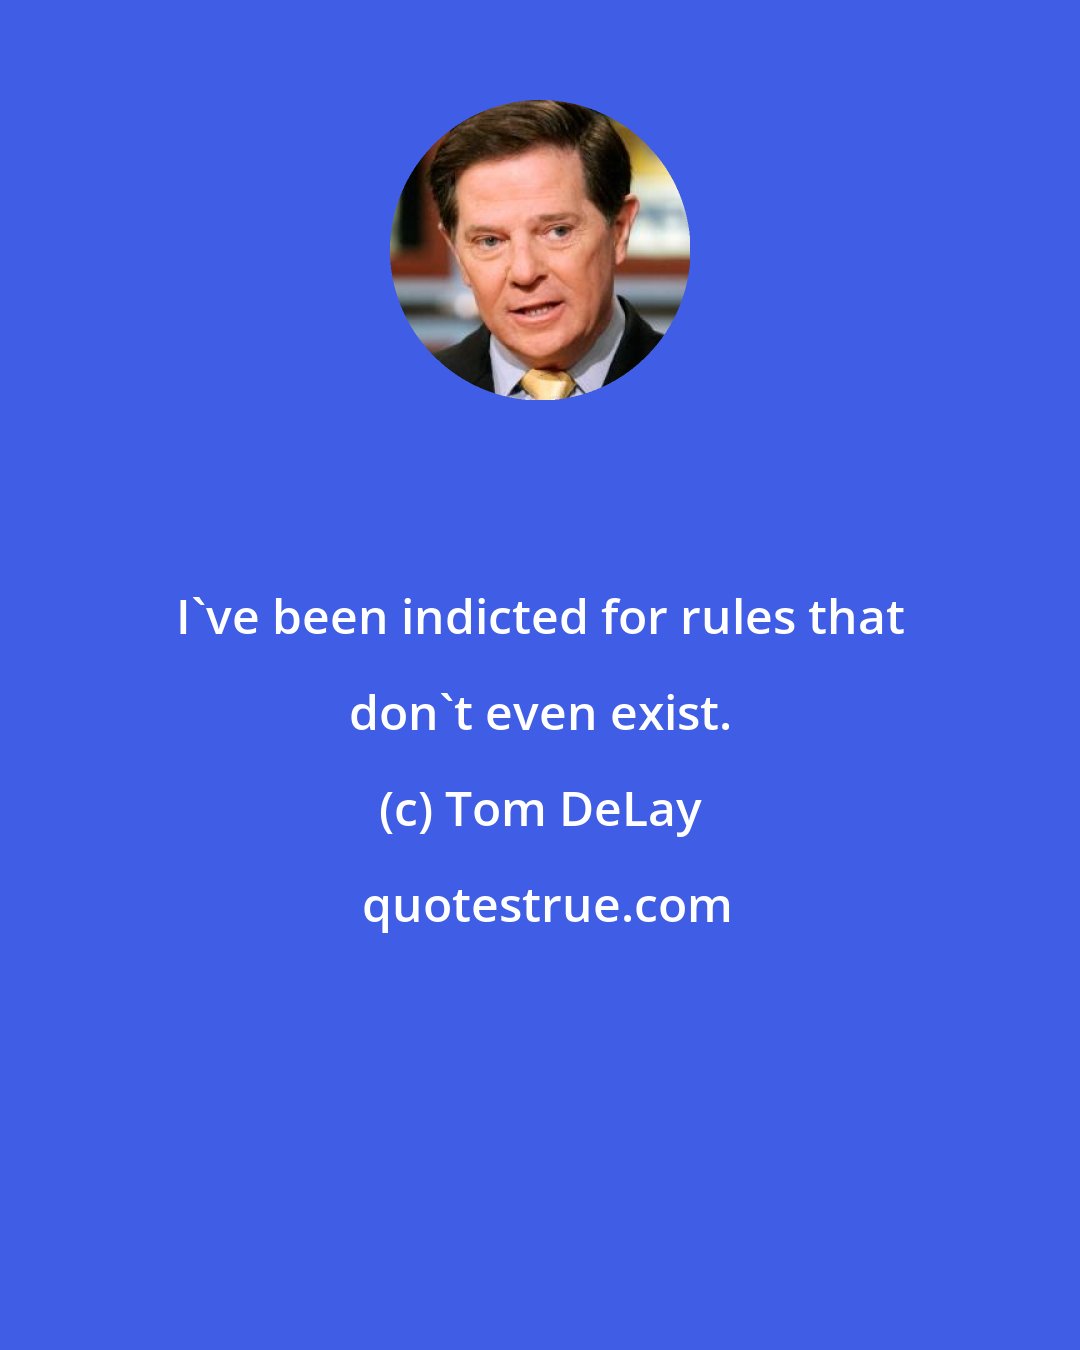 Tom DeLay: I've been indicted for rules that don't even exist.